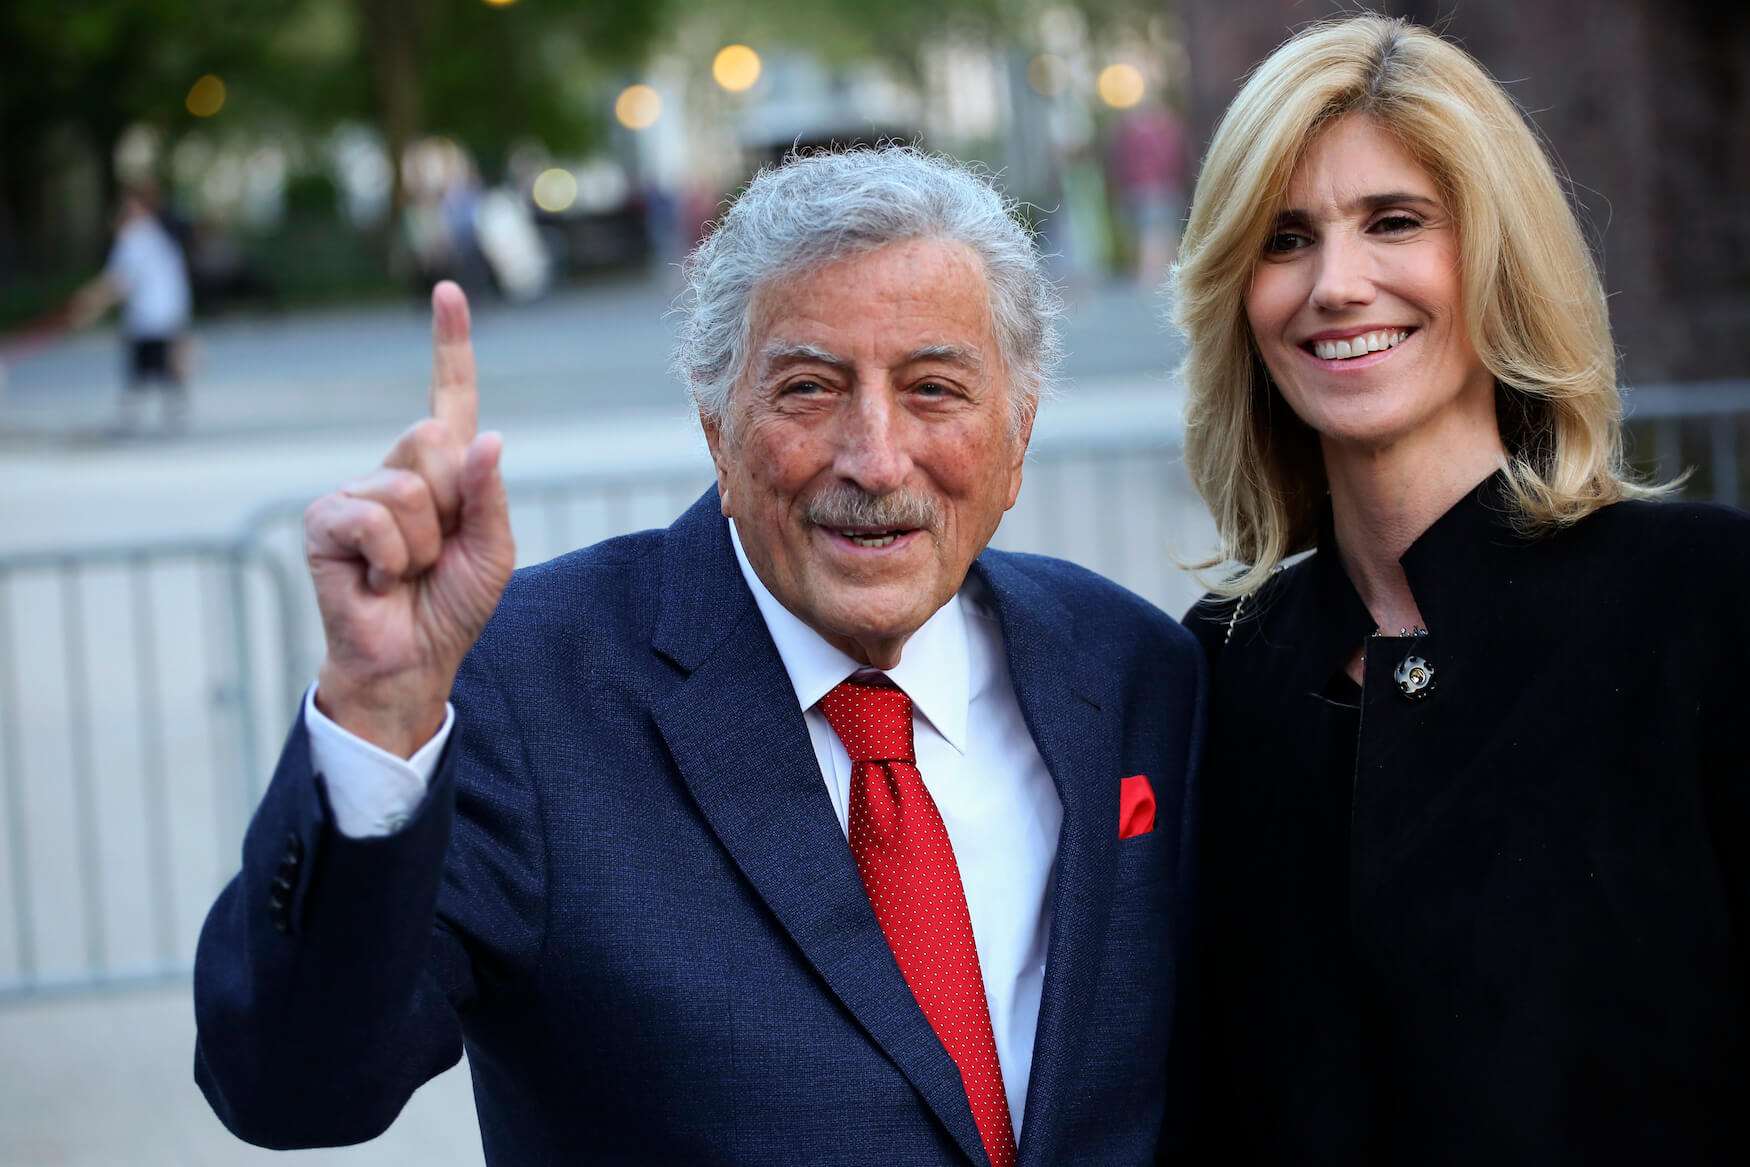 Tony Bennett and his wife, Susan Benedetto, standing together and smiling outdoors